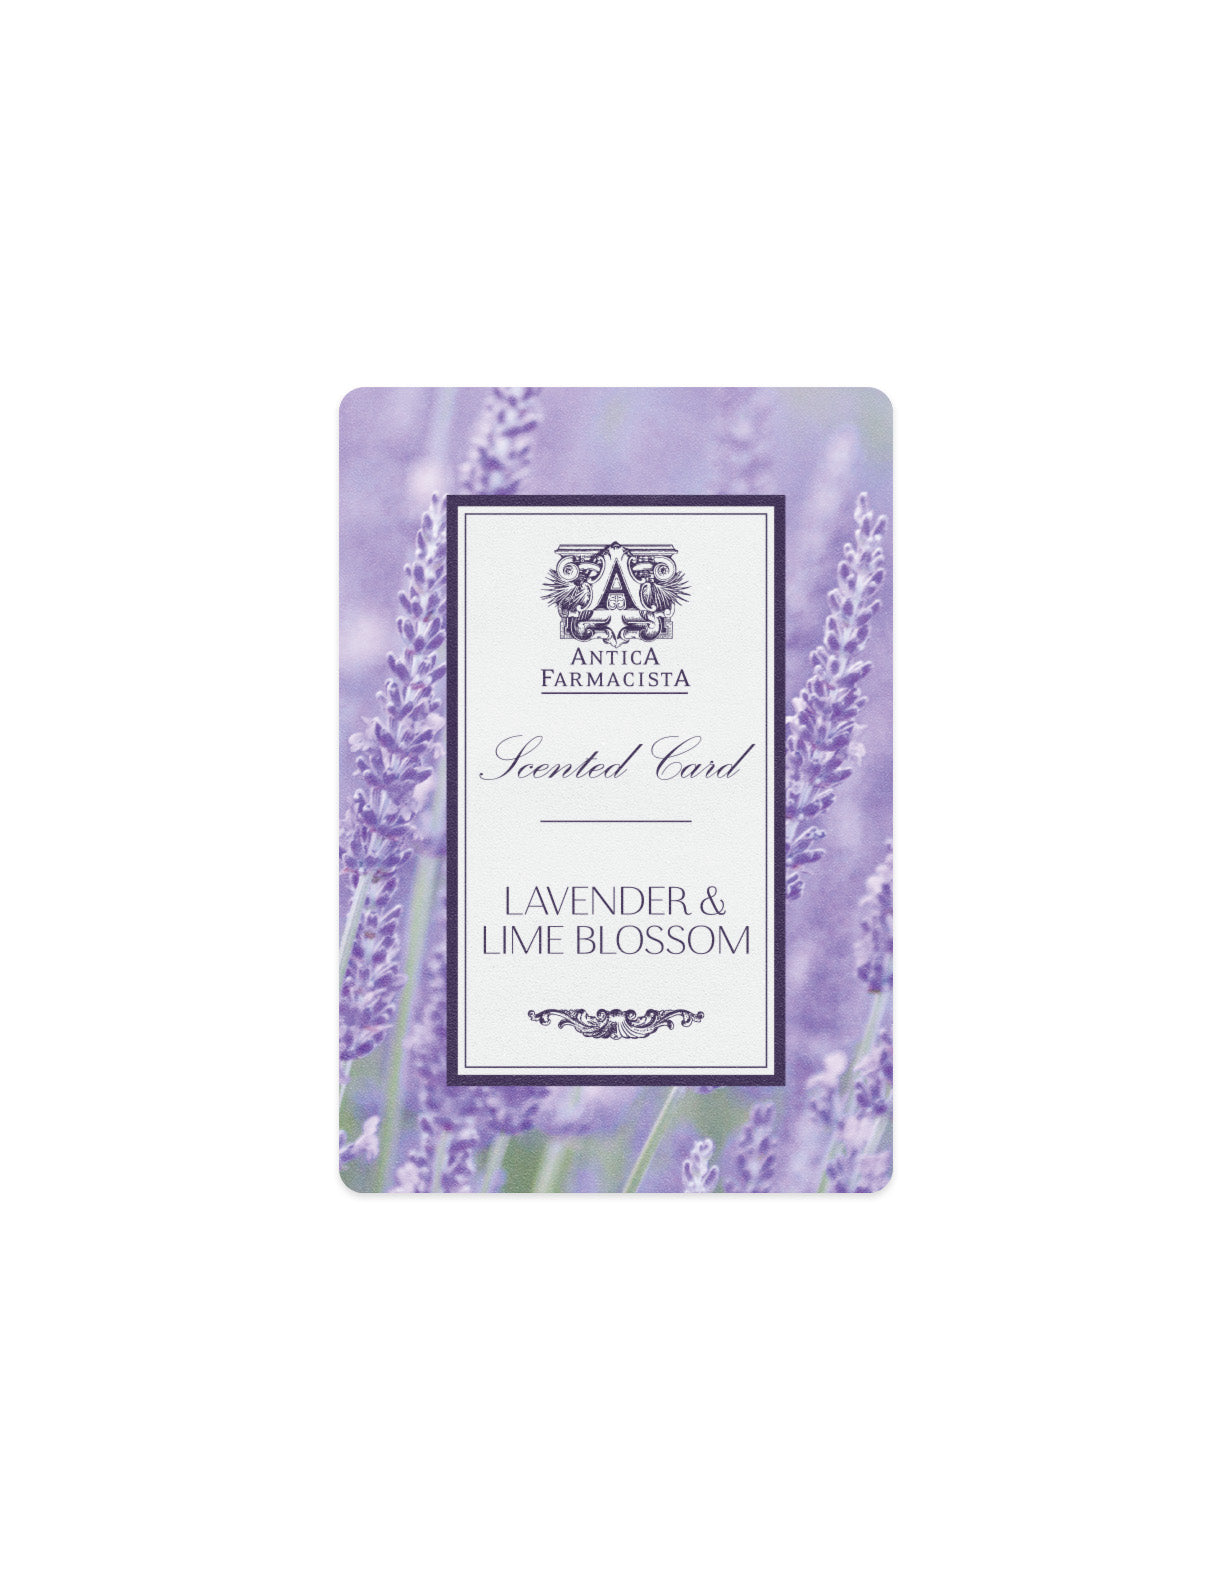 Scented Card - Lavender & Lime Blossom